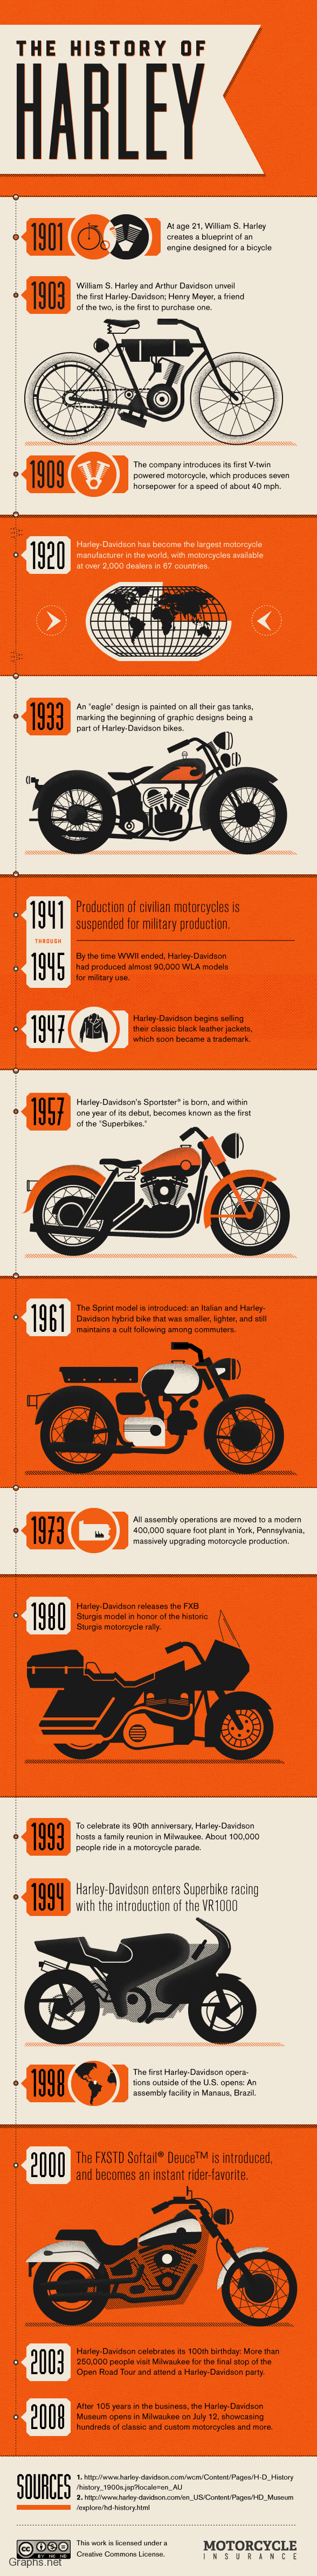 The history of Harley